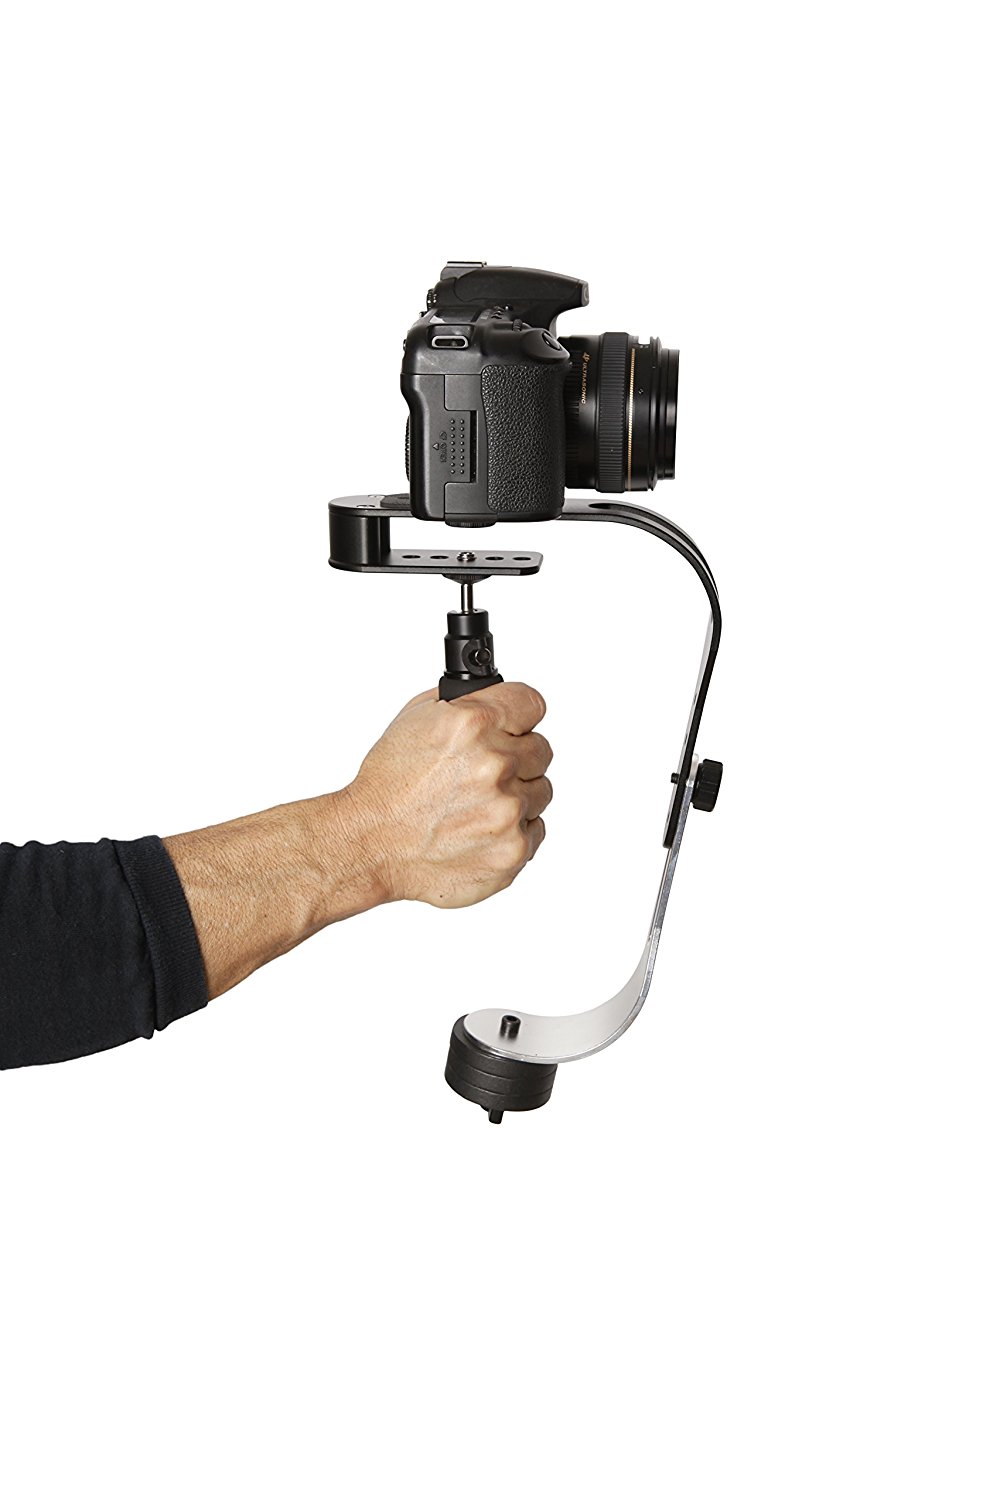 Giá đỡ máy quay The OFFICIAL ROXANT PRO (Midnight Black Limited Edition With Low Profile Handle) video camera stabilizer